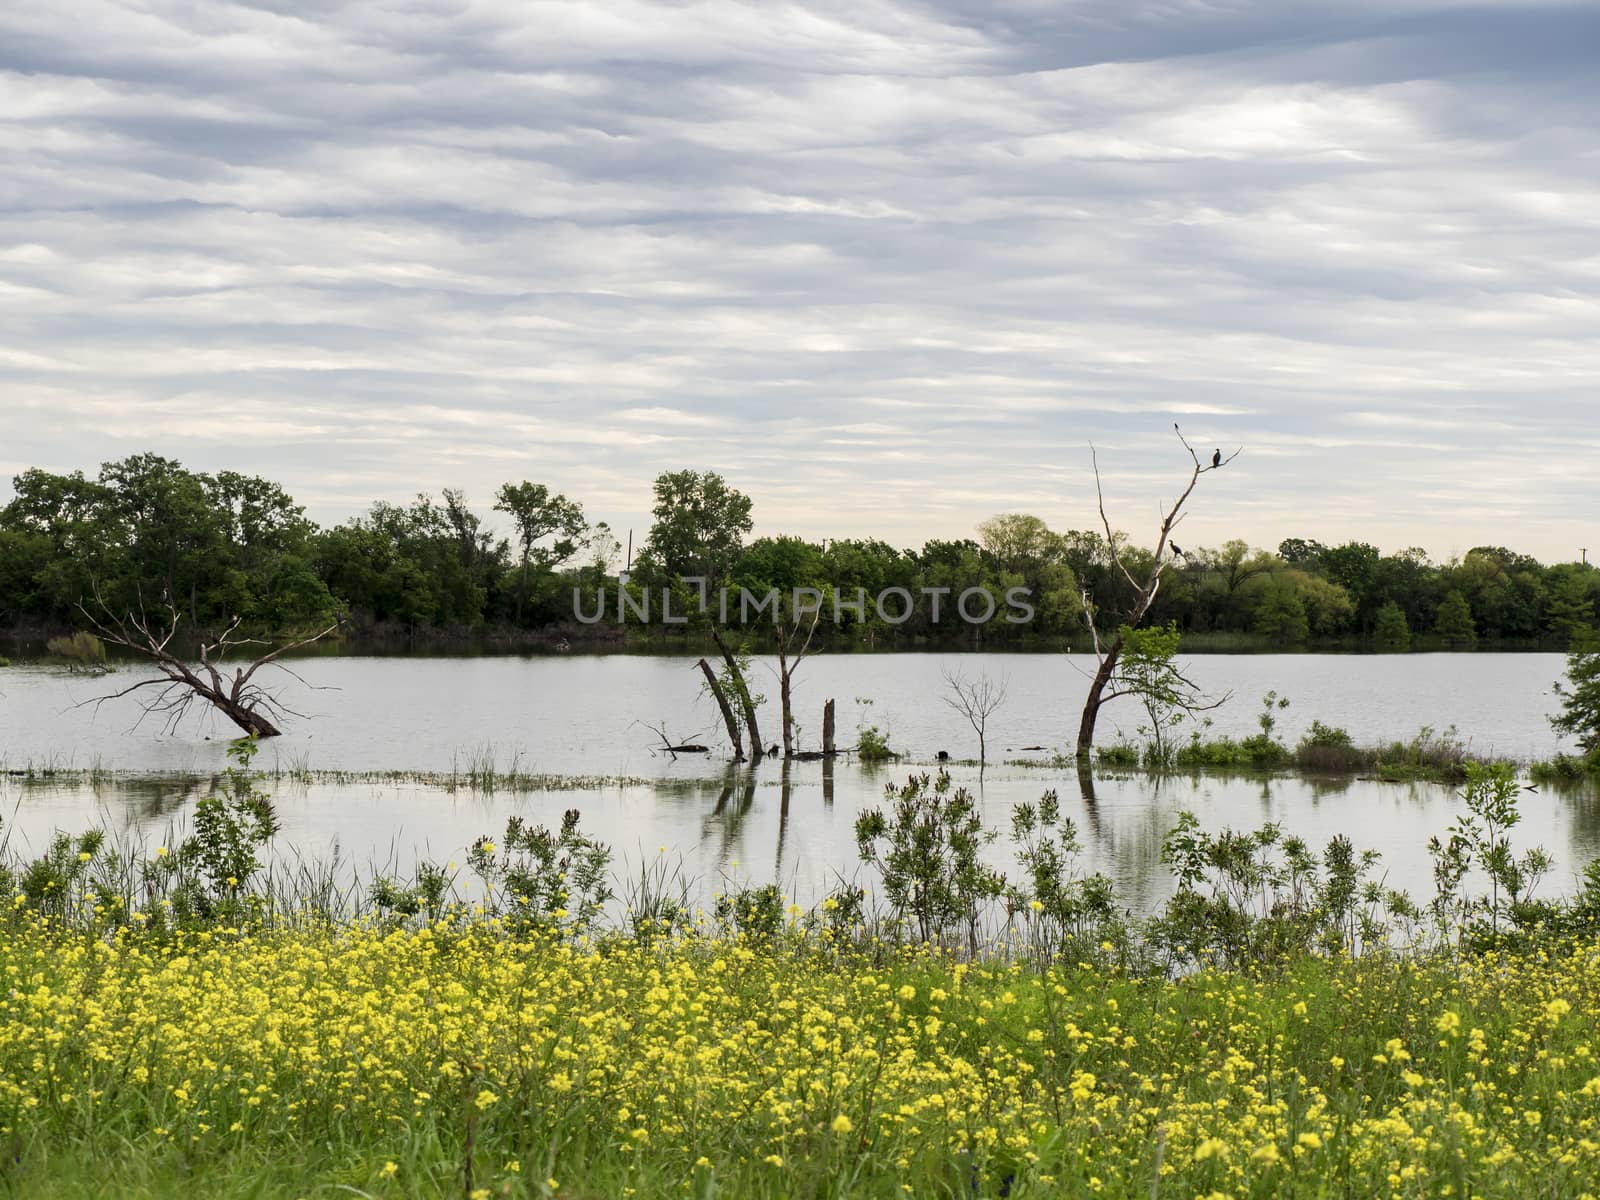 Cormorant standing on a tree, foreground are canola flowers







OLYMPUS DIGITAL CAMERA